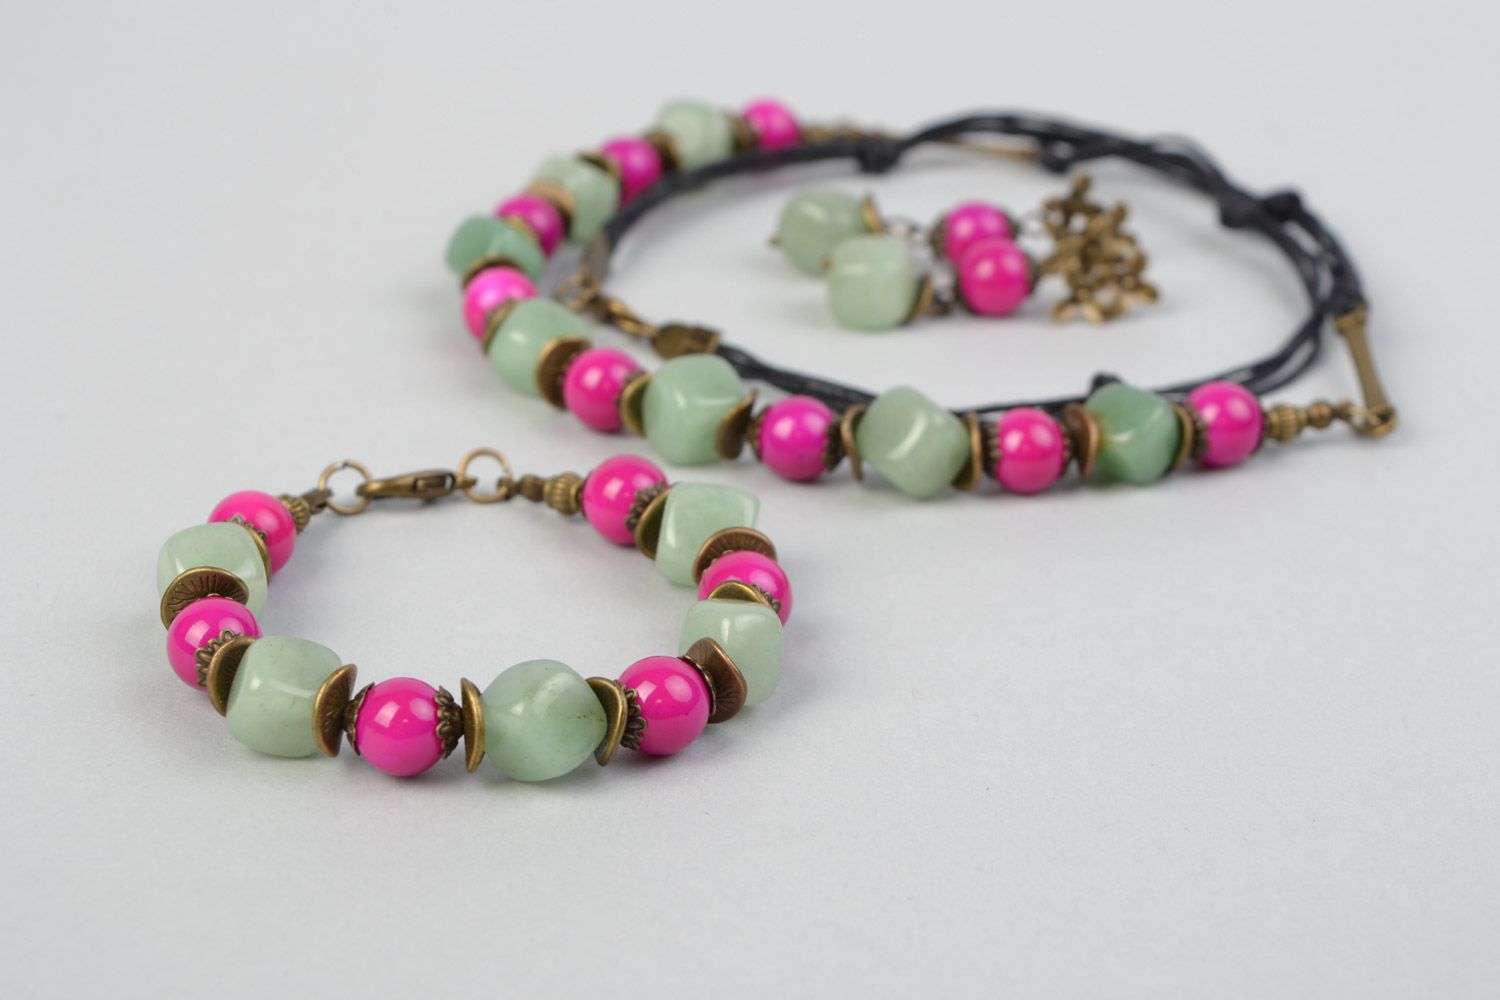 Handmade natural stones jewelry set necklace wrist bracelet and long earrings photo 5